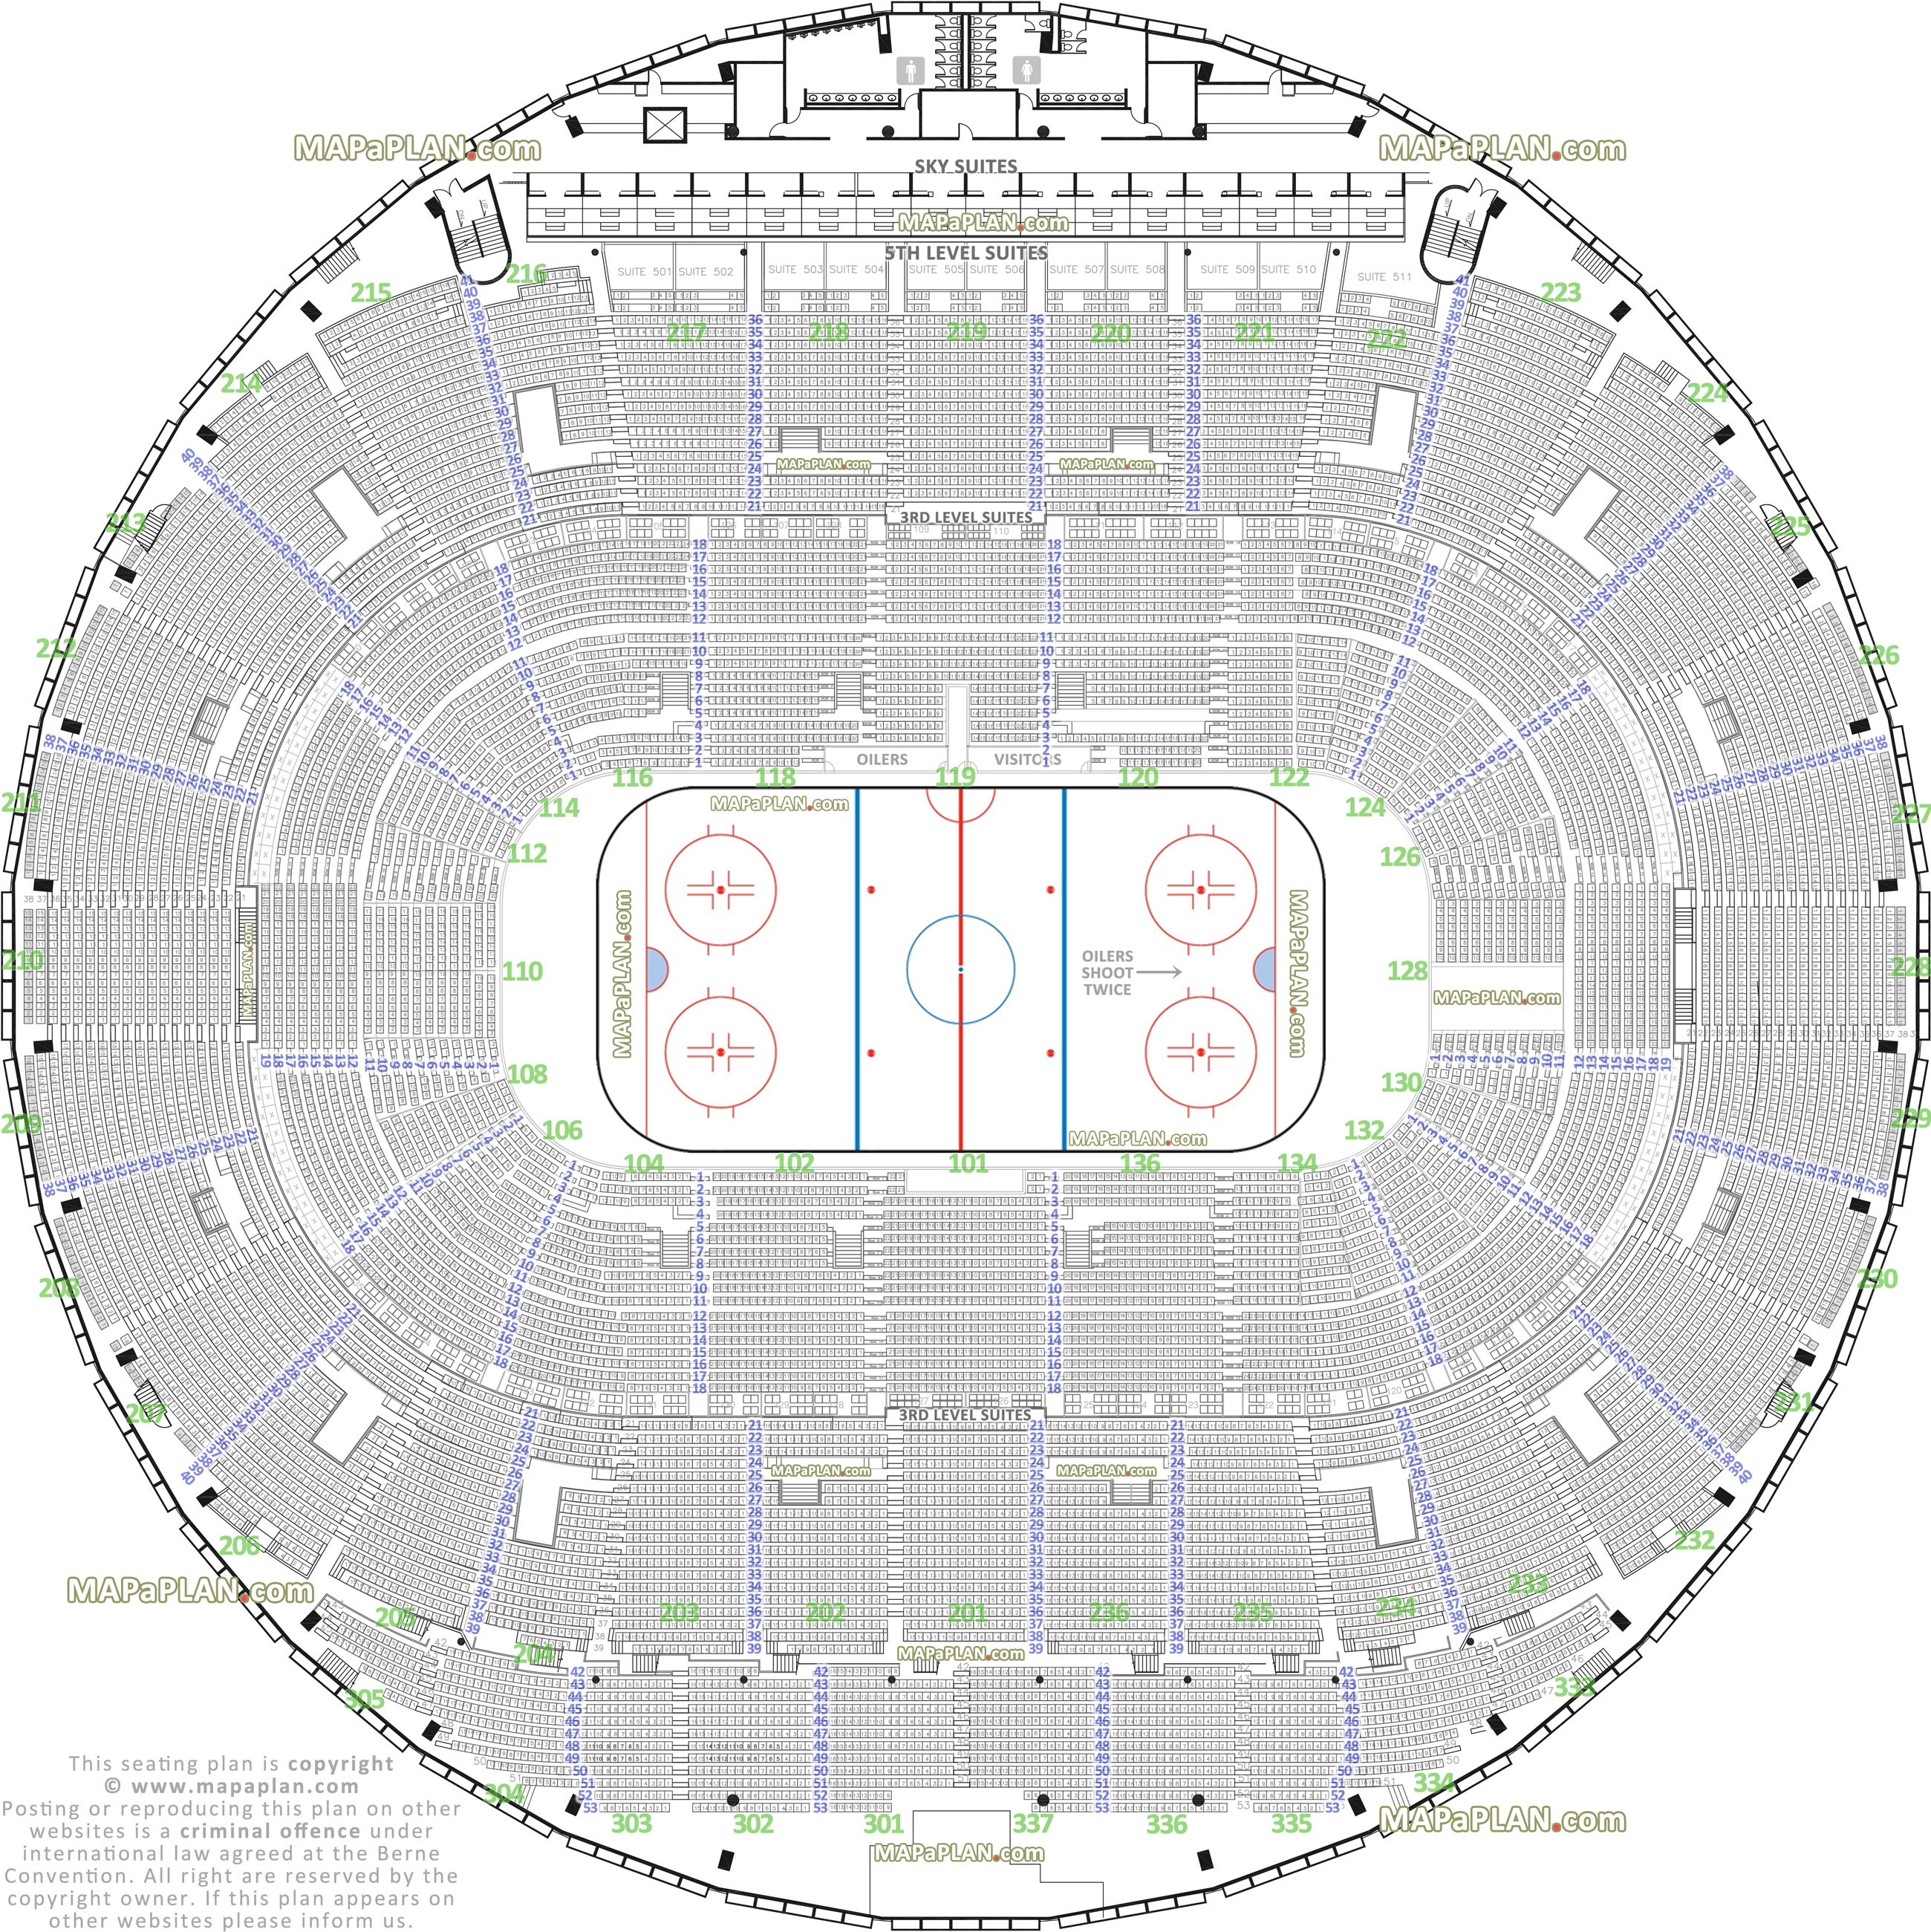 New Oilers Arena Seating Chart